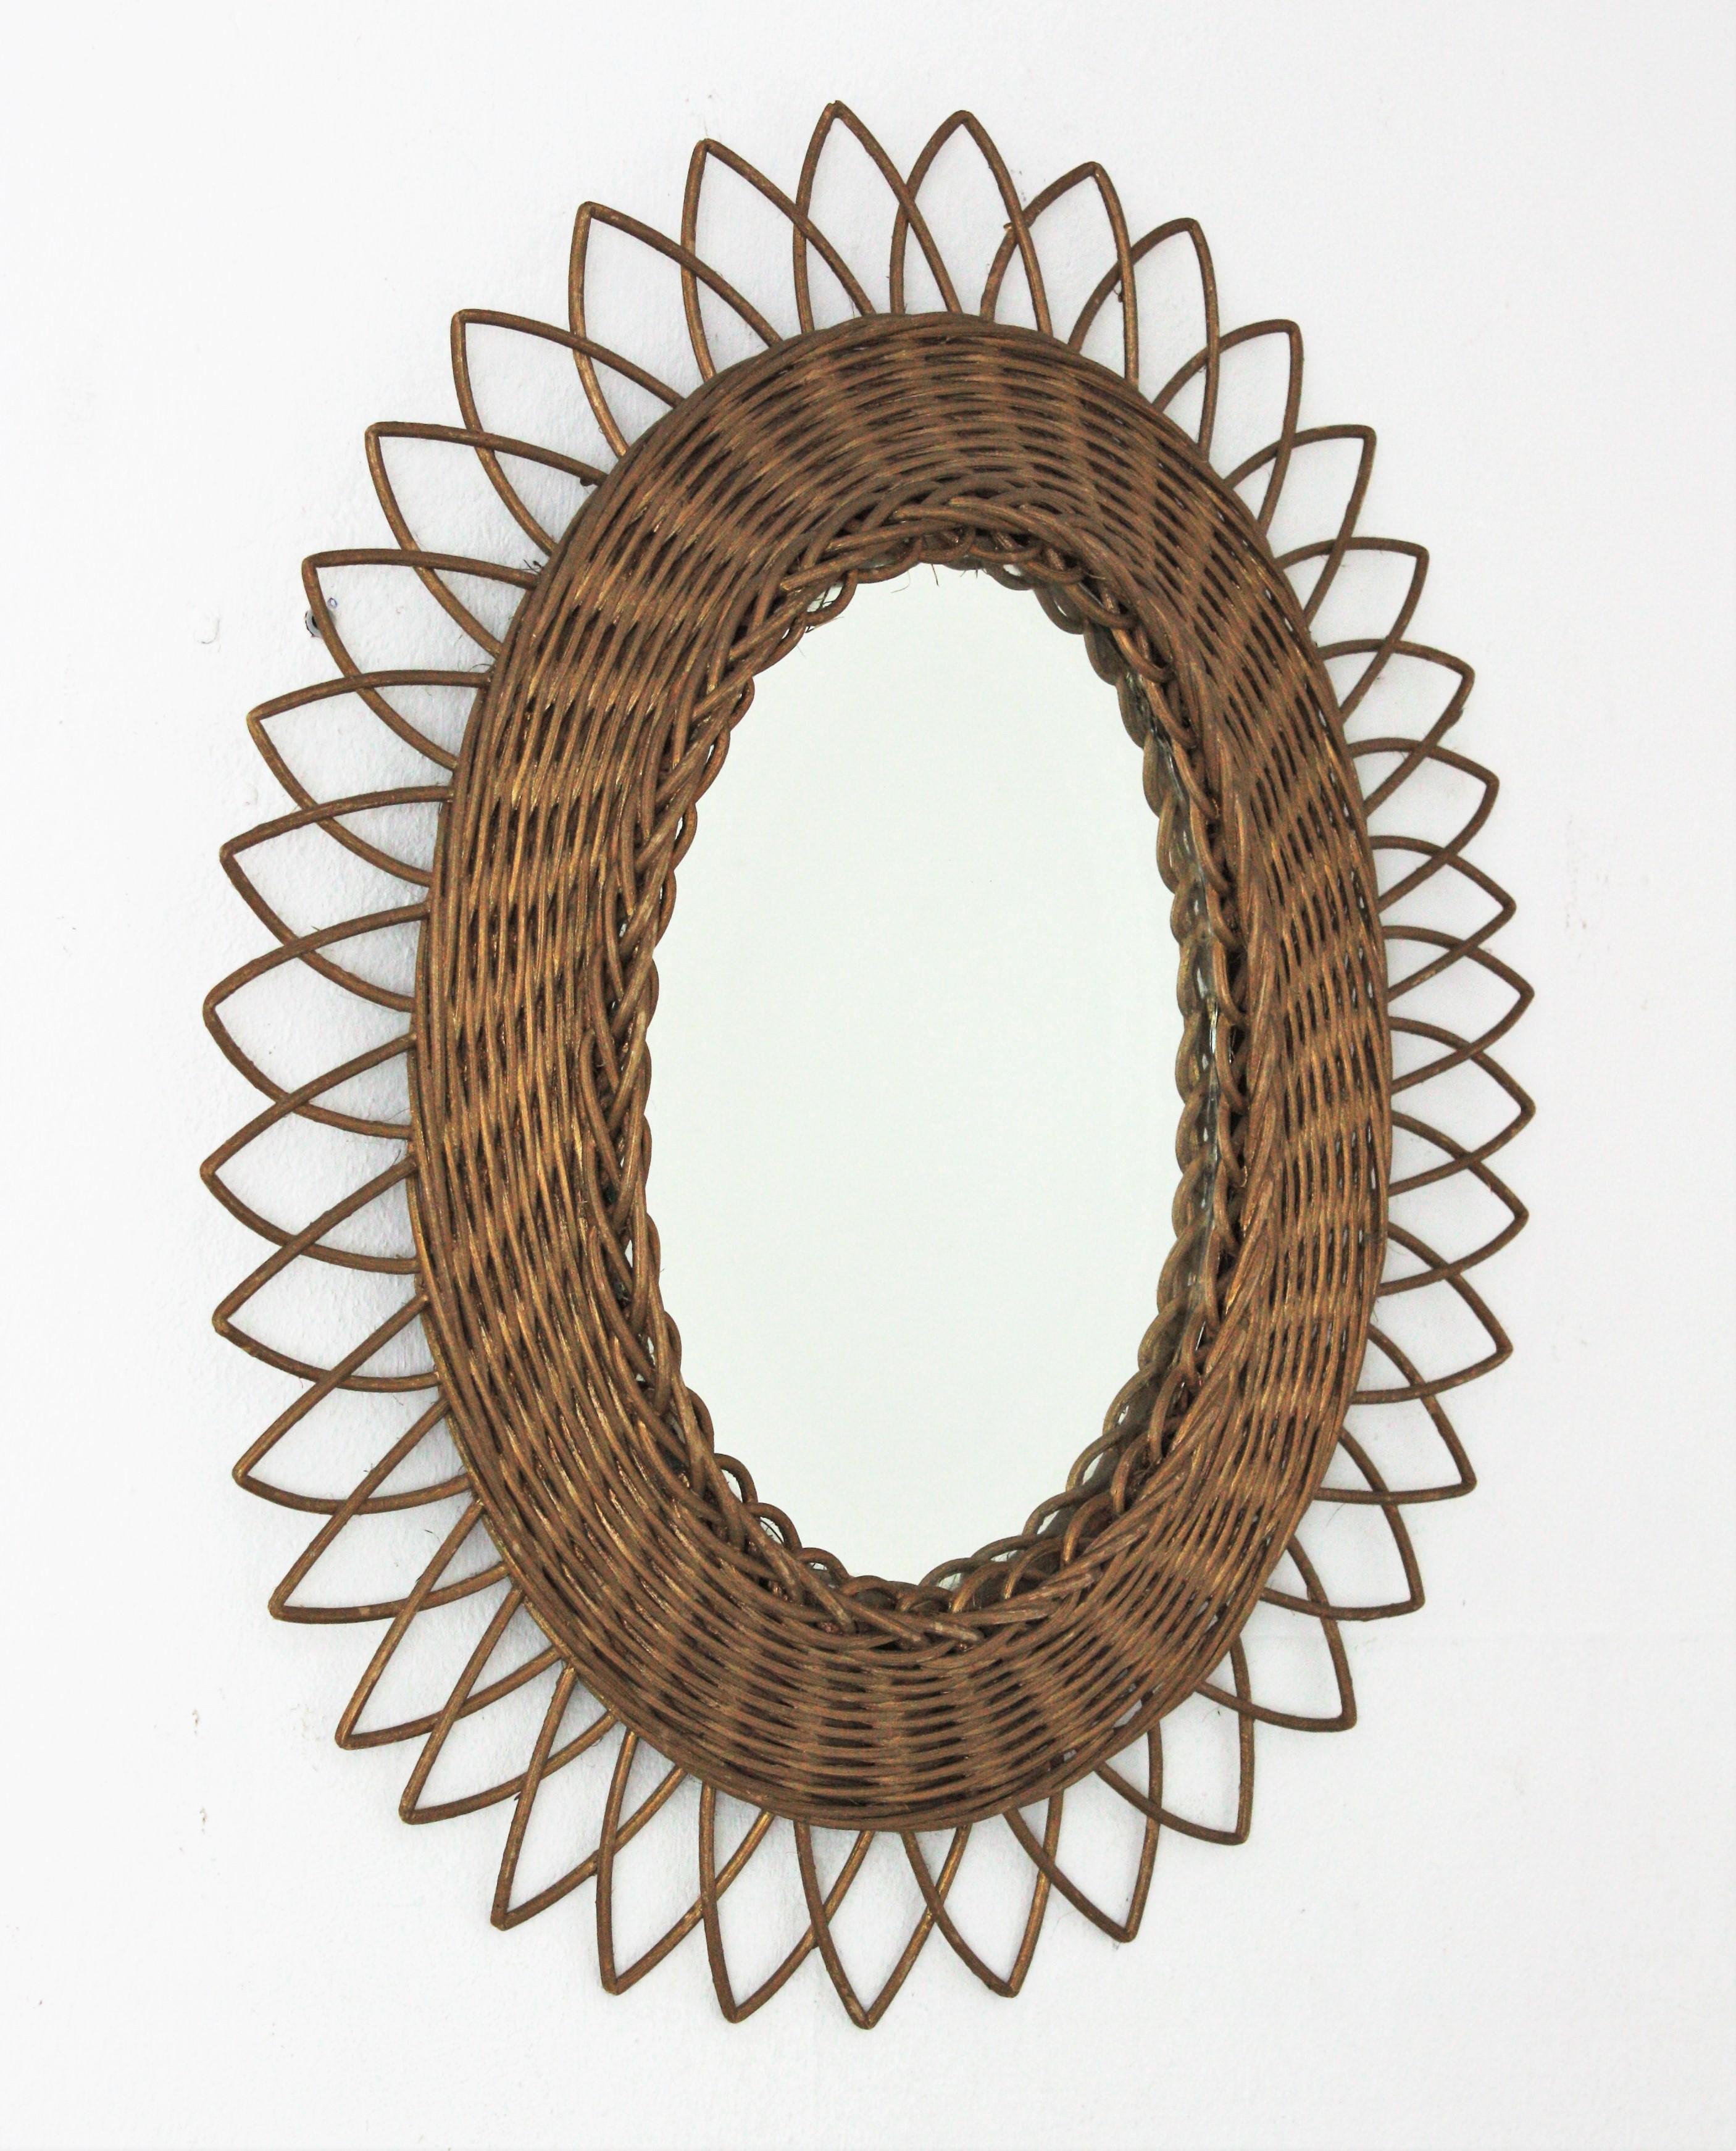 Lovely rattan or wicker mirror with golden paint finishing, France, 1960s.
This handcrafted sunburst mirror has a braided rattan frame. Painted in gold color to add a pinch of glam.
It will be a nice addition to a sunburst mirrors wall